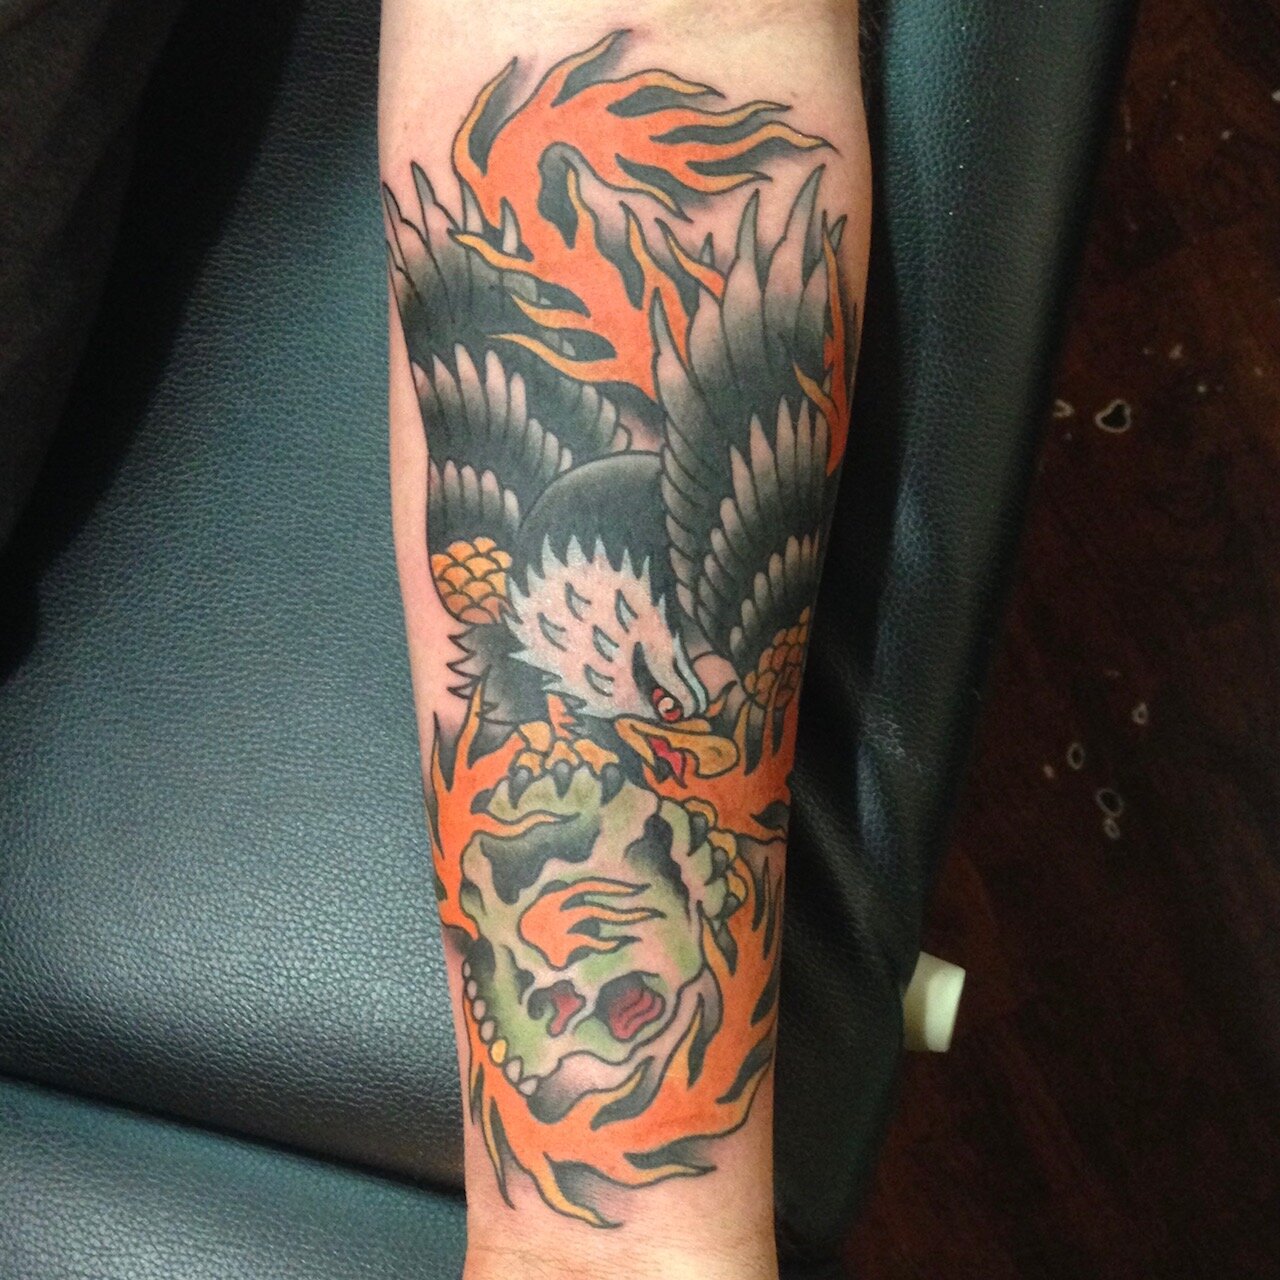 Eagle tattoo with flames by Josh Hanes at Southern Star Tattoo in Atlanta, Georgia